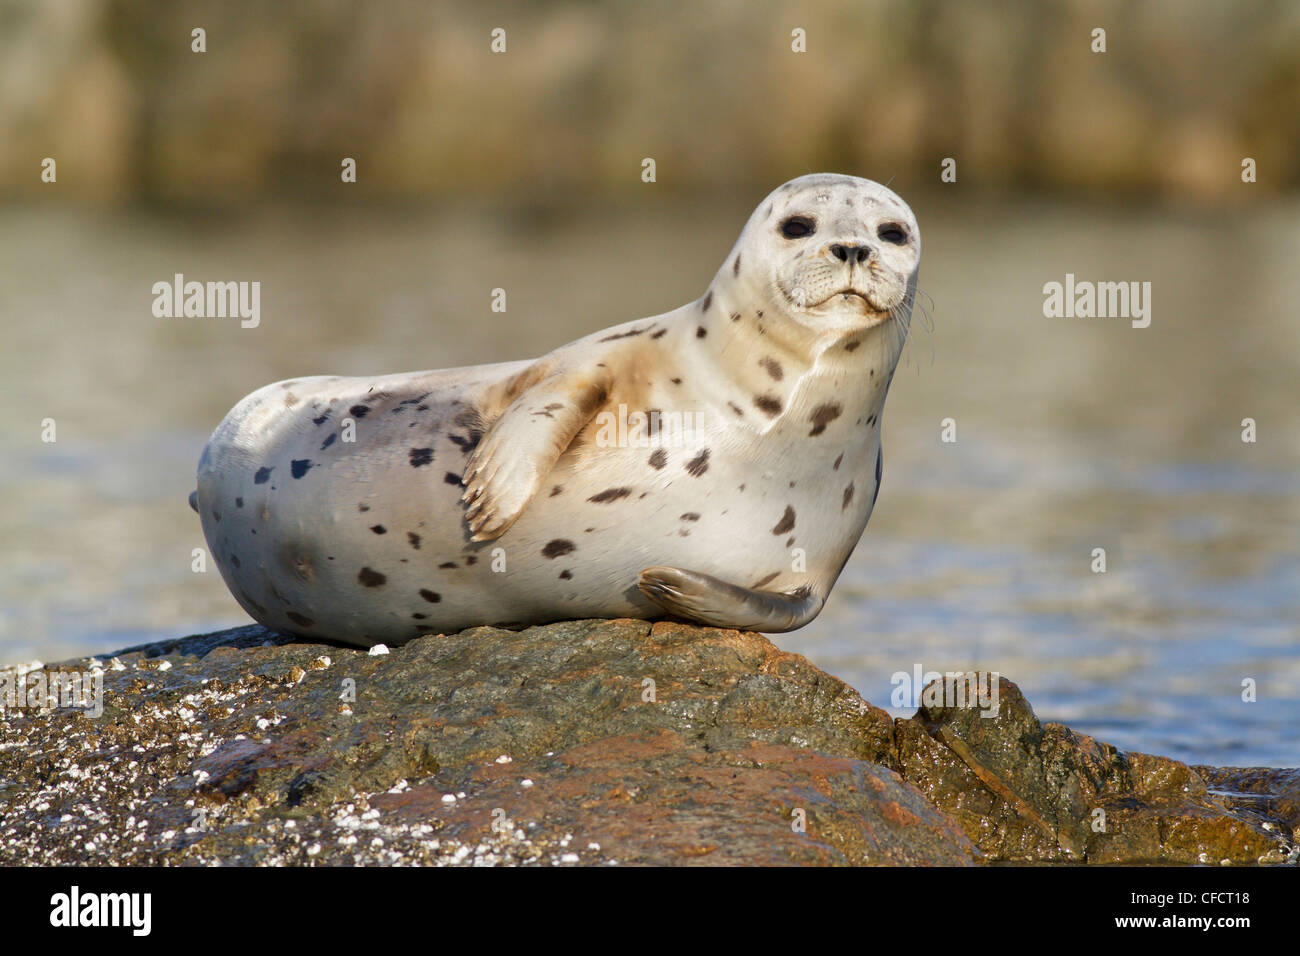 A Harbour Seal (Phoca vitulina) perched on a rock in Victoria, British Columbia, Canada. Stock Photo